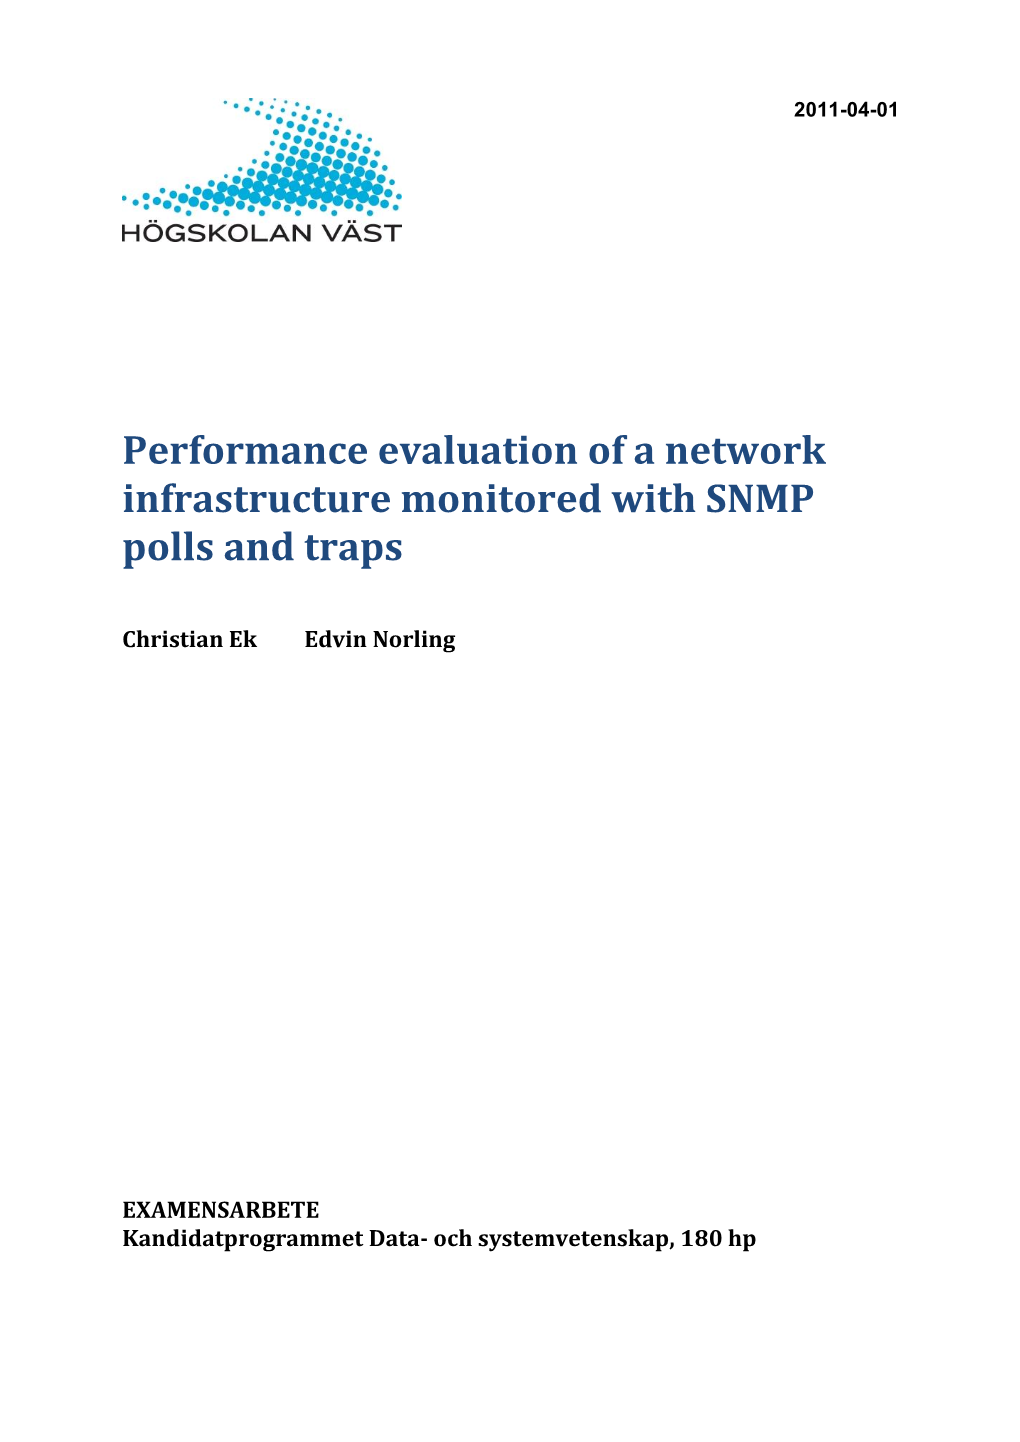 Performance Evaluation of a Network Infrastructure Monitored with SNMP Polls and Traps